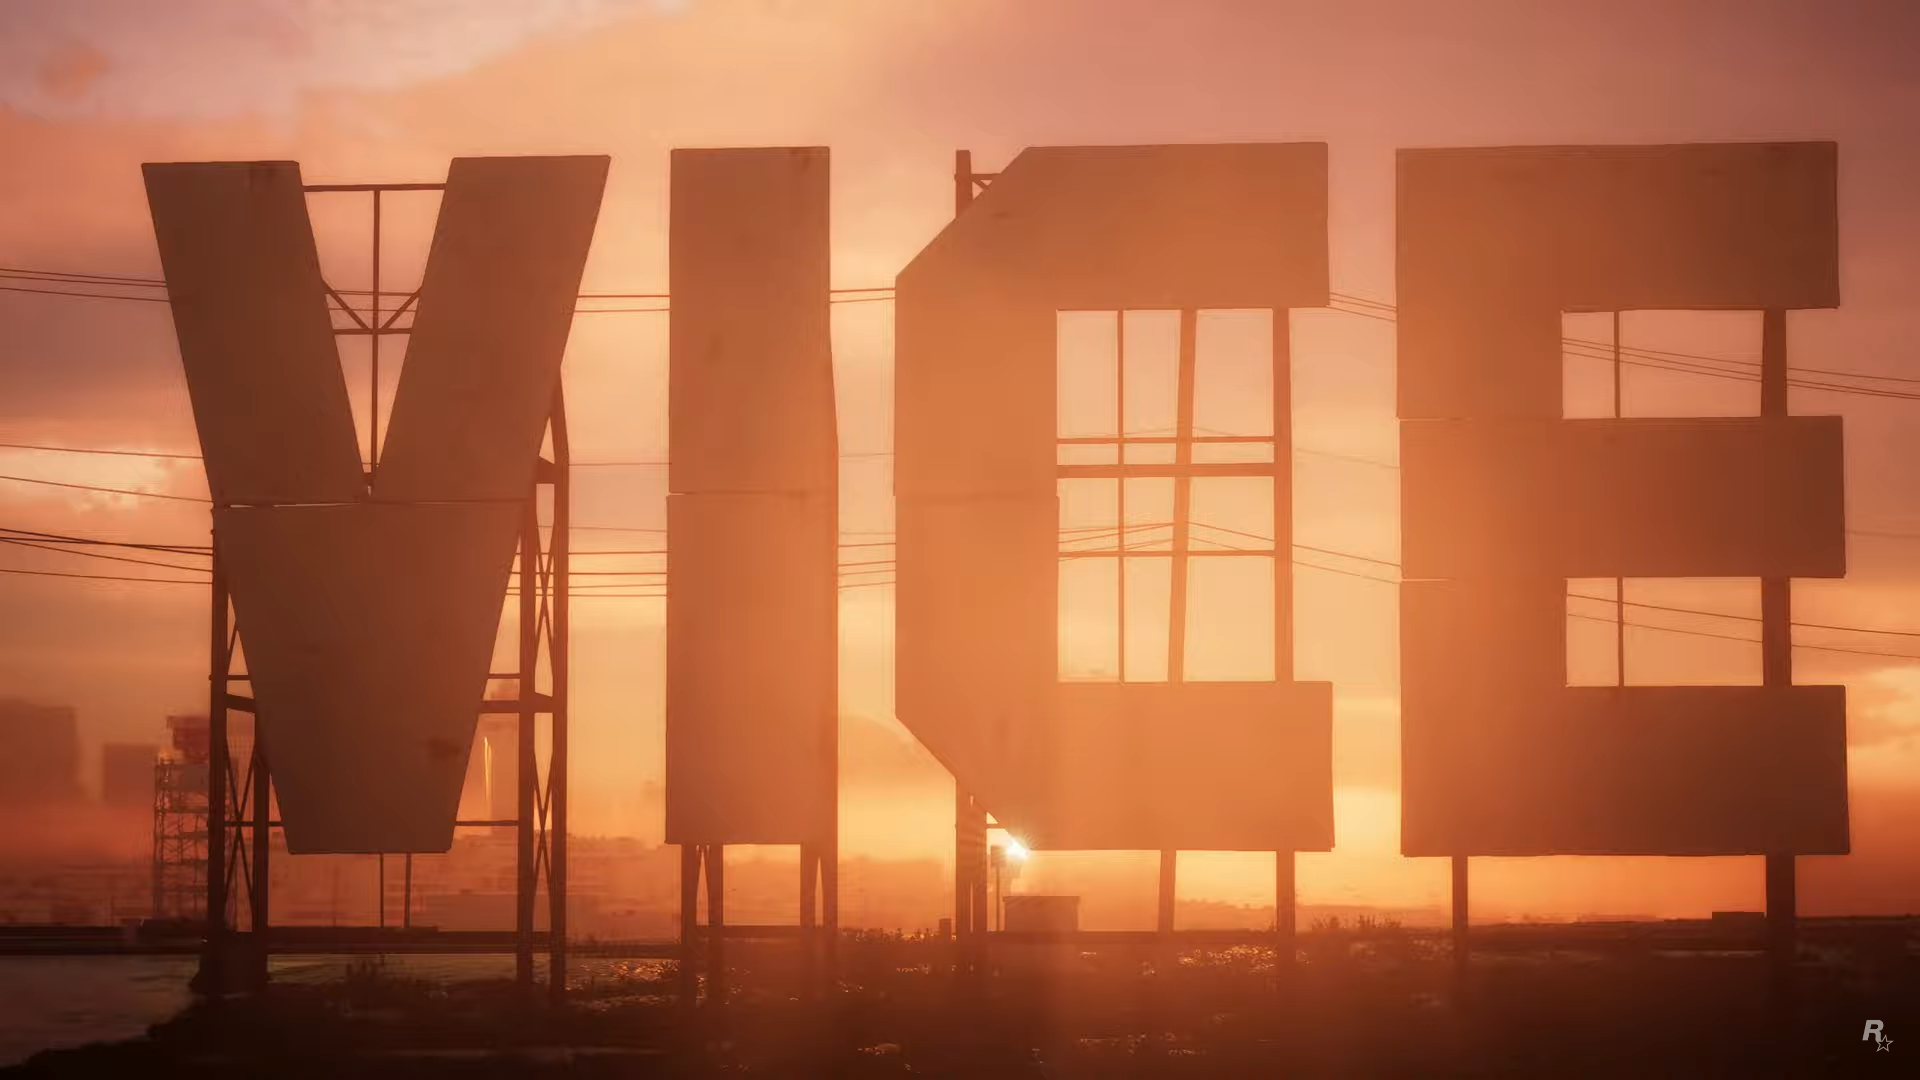 The Vice City sign, parodying the Hollywood sign in real life